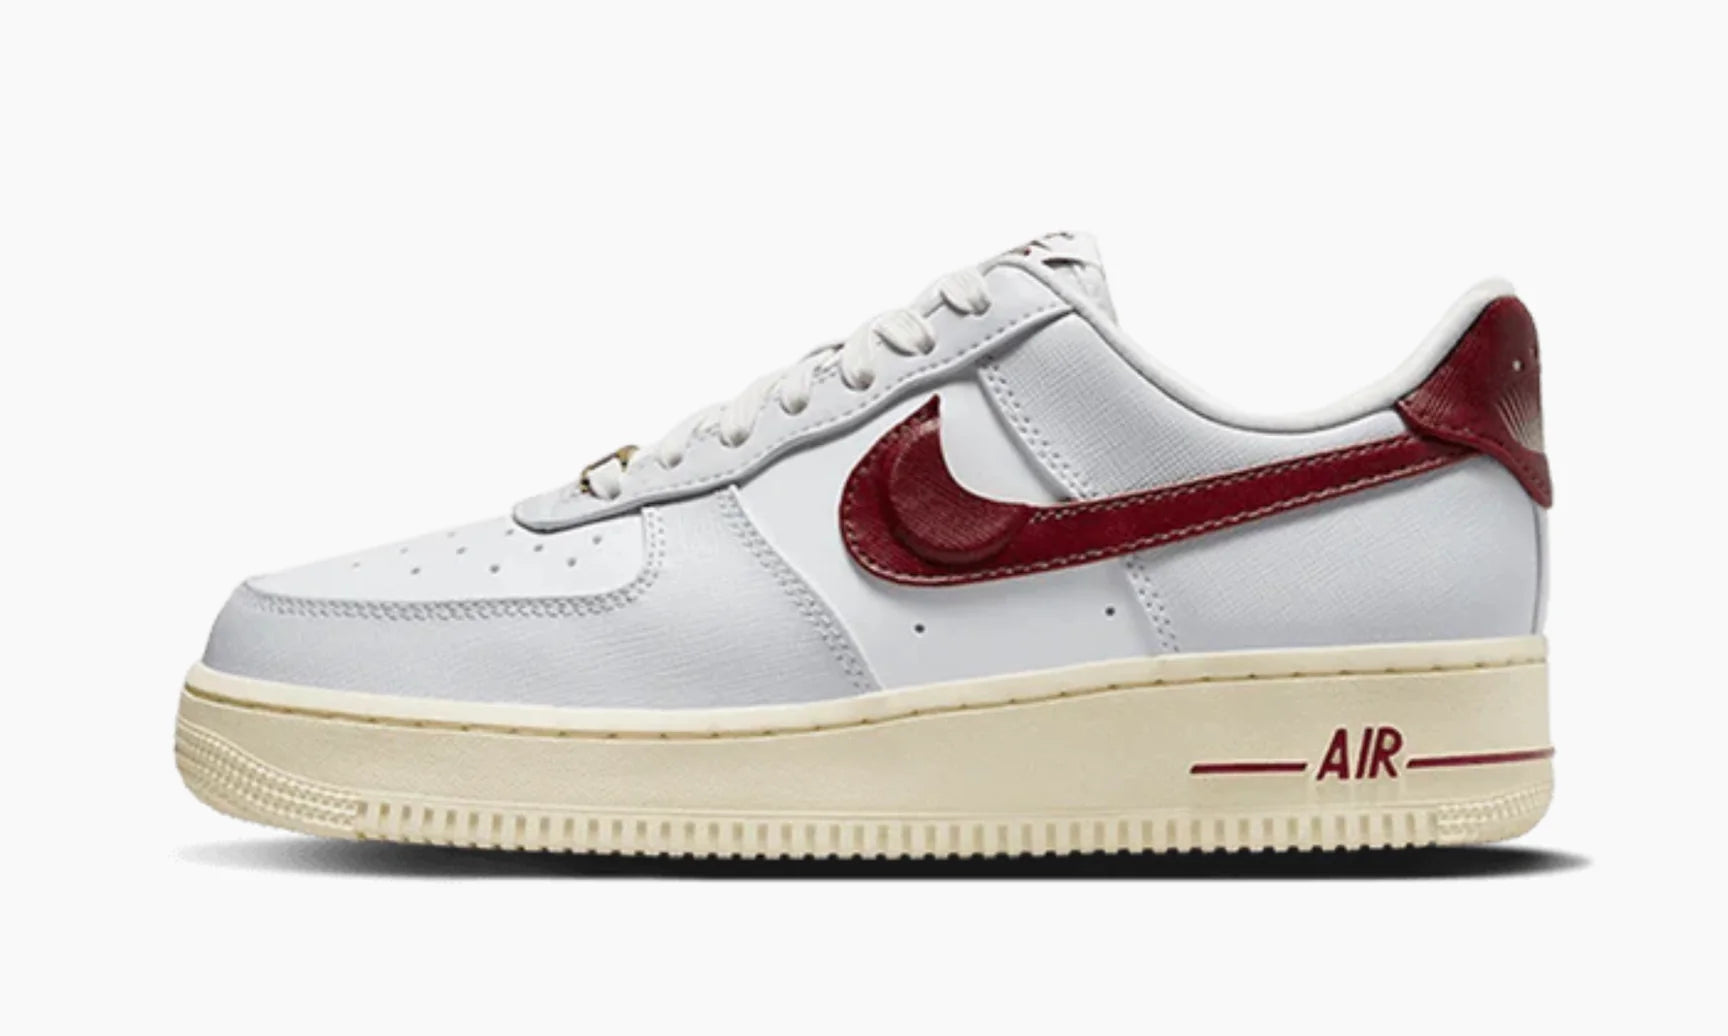 Nike Air Force 1 Low Just Do It Photon Dust Team Red